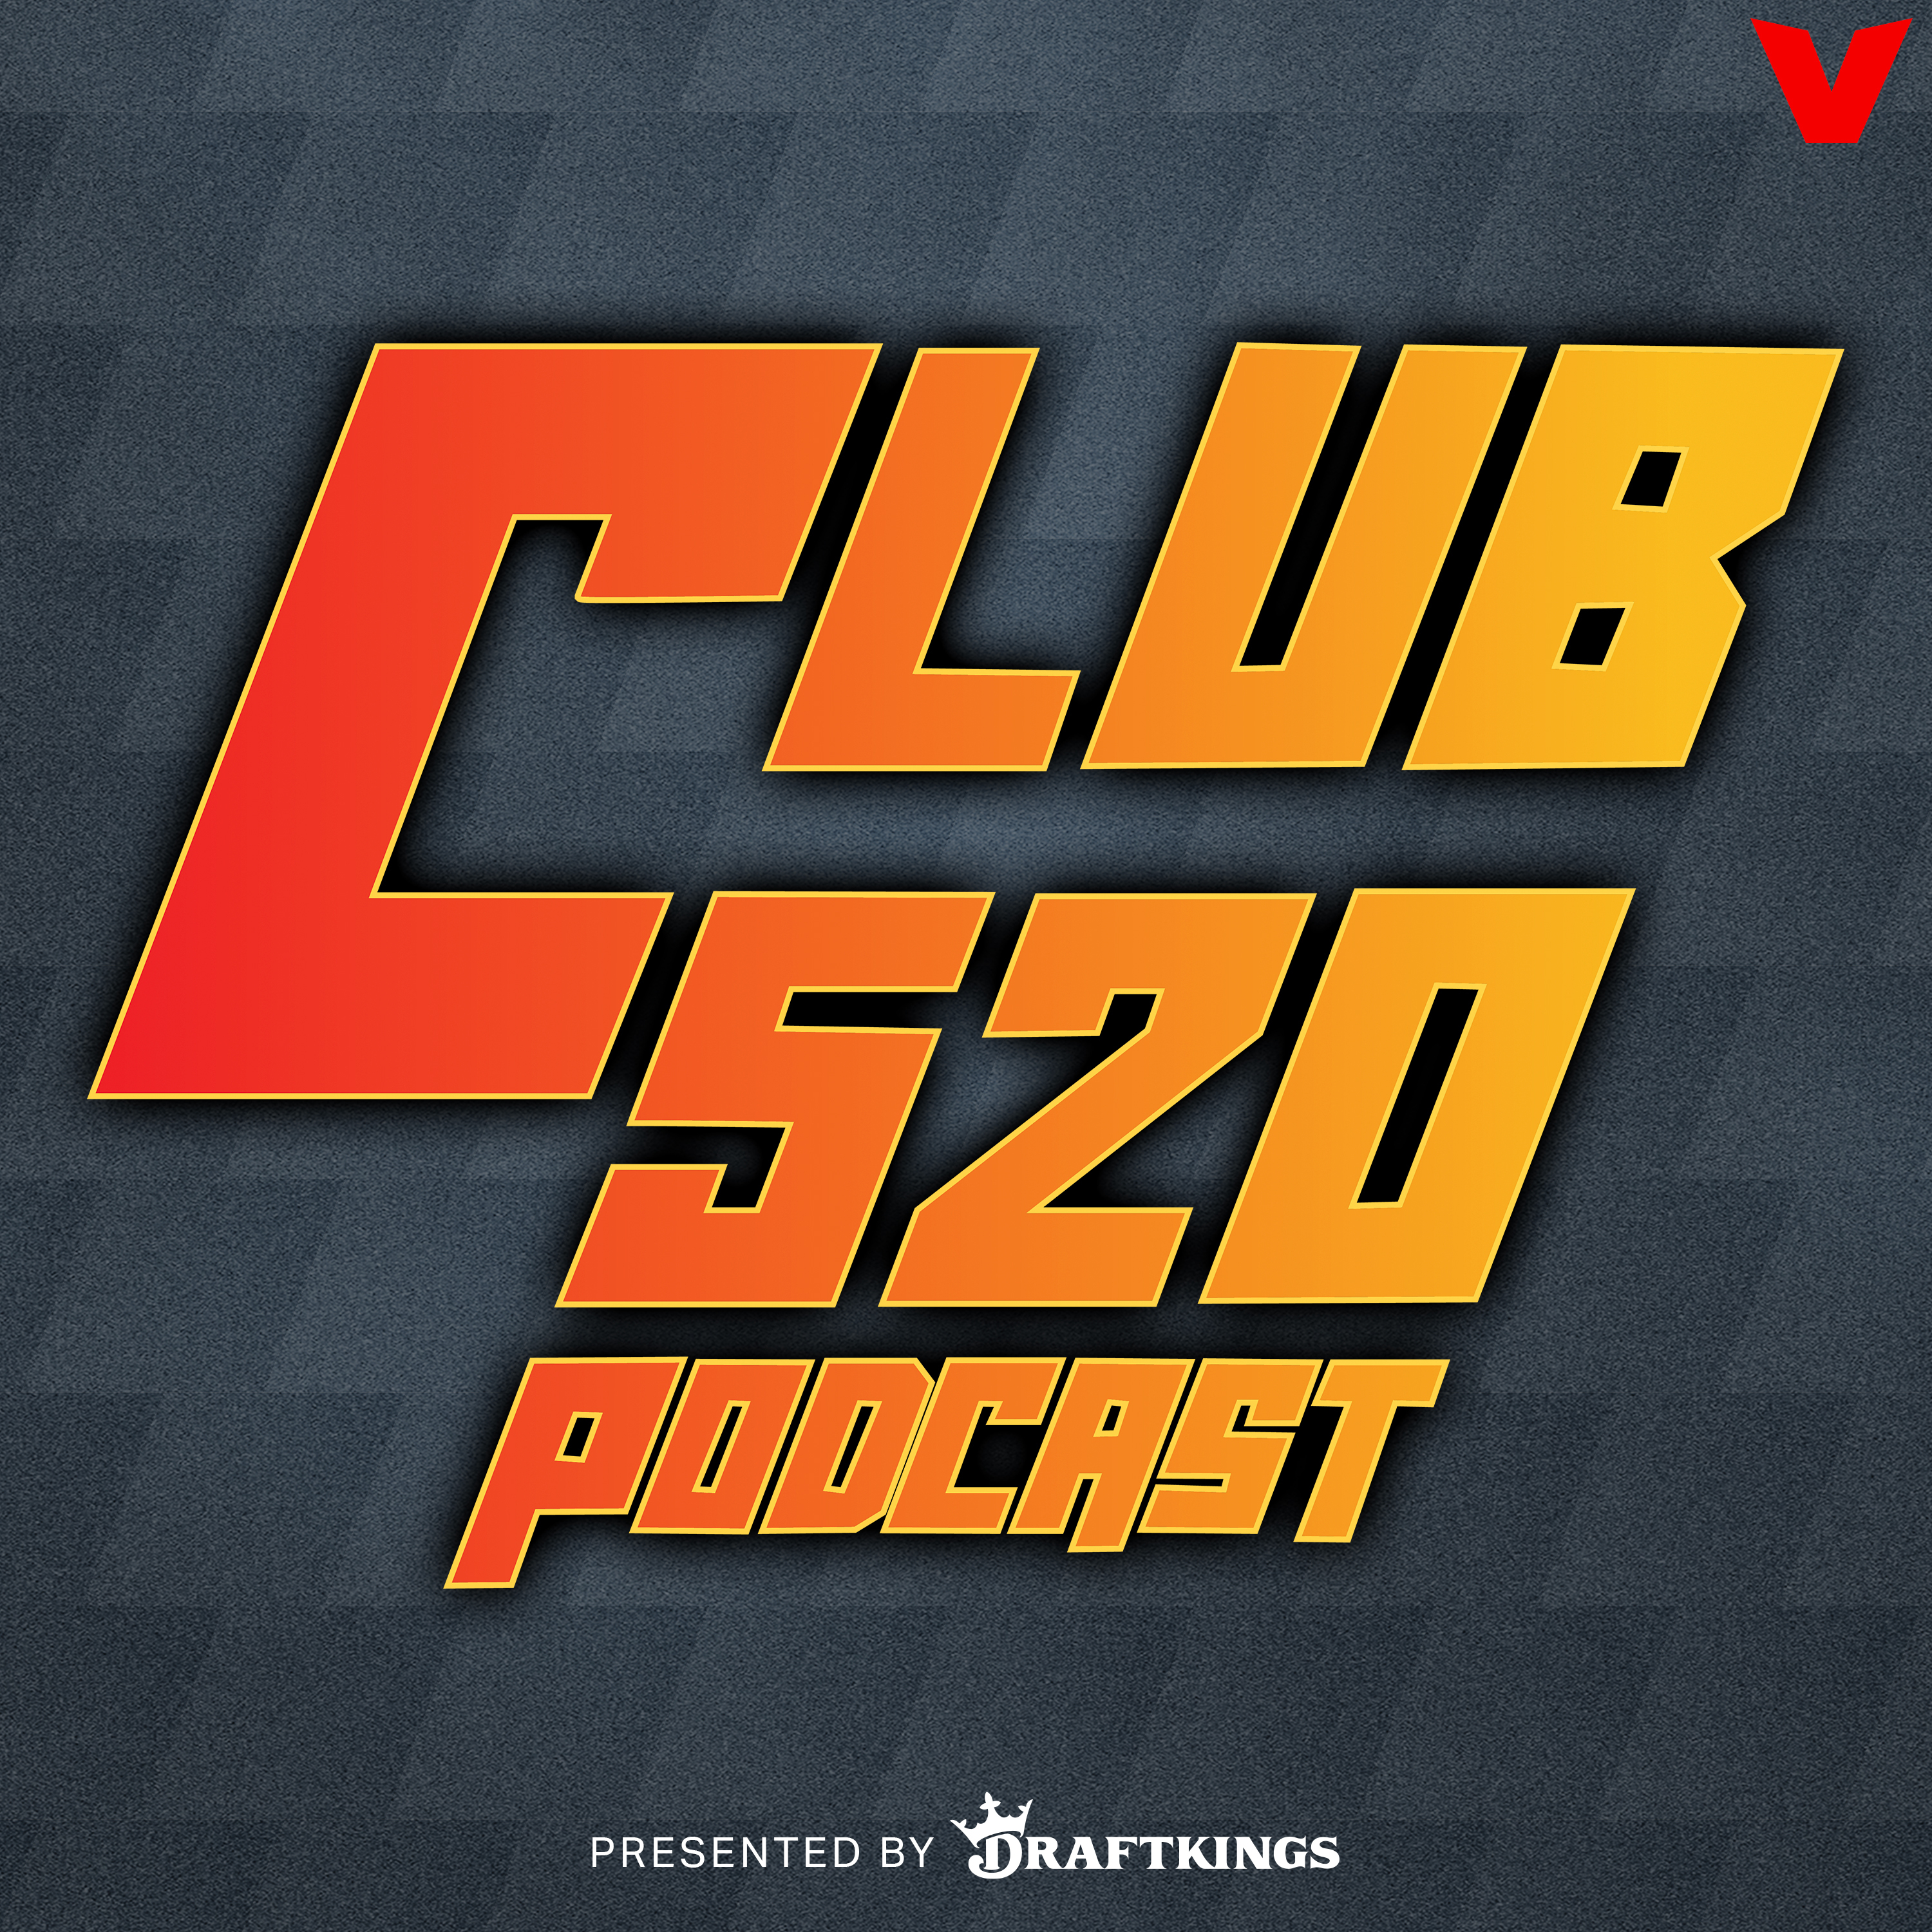 Club 520 - Jeff Teague says Warriors dynasty OVER, LeBron’s Lakers need fix, Jason Whitlock reaction by iHeartPodcasts and The Volume